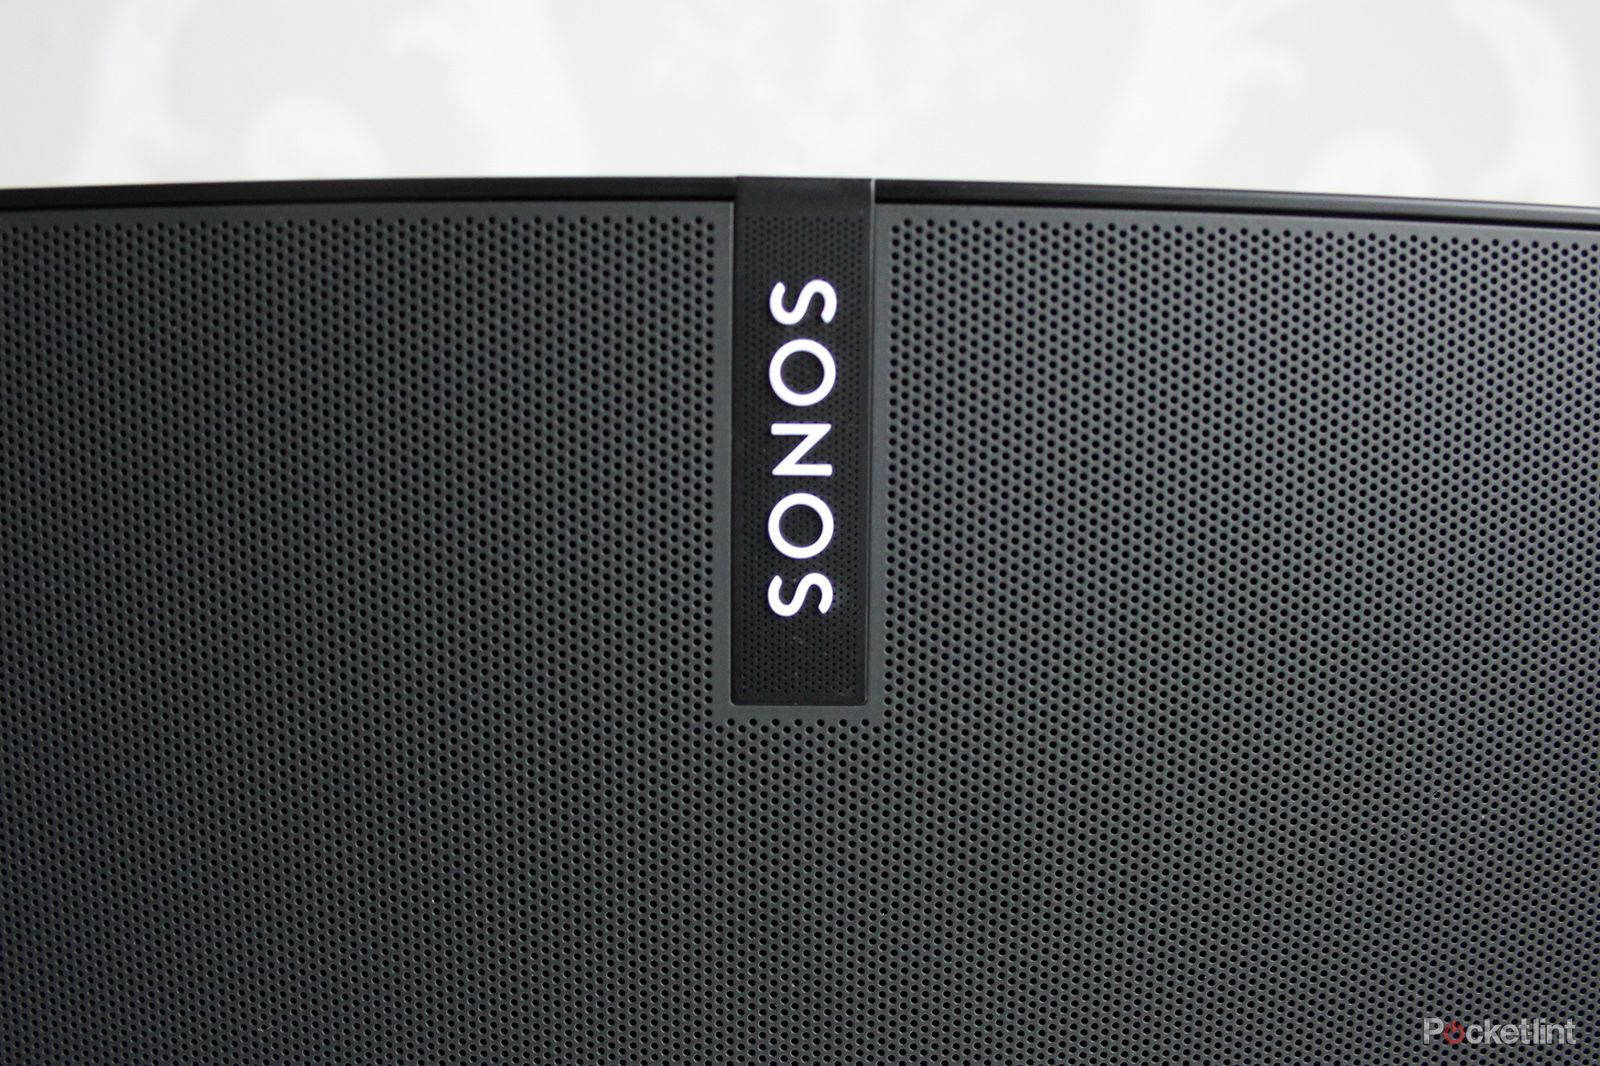 Sonos Radio is free with curated stations and more